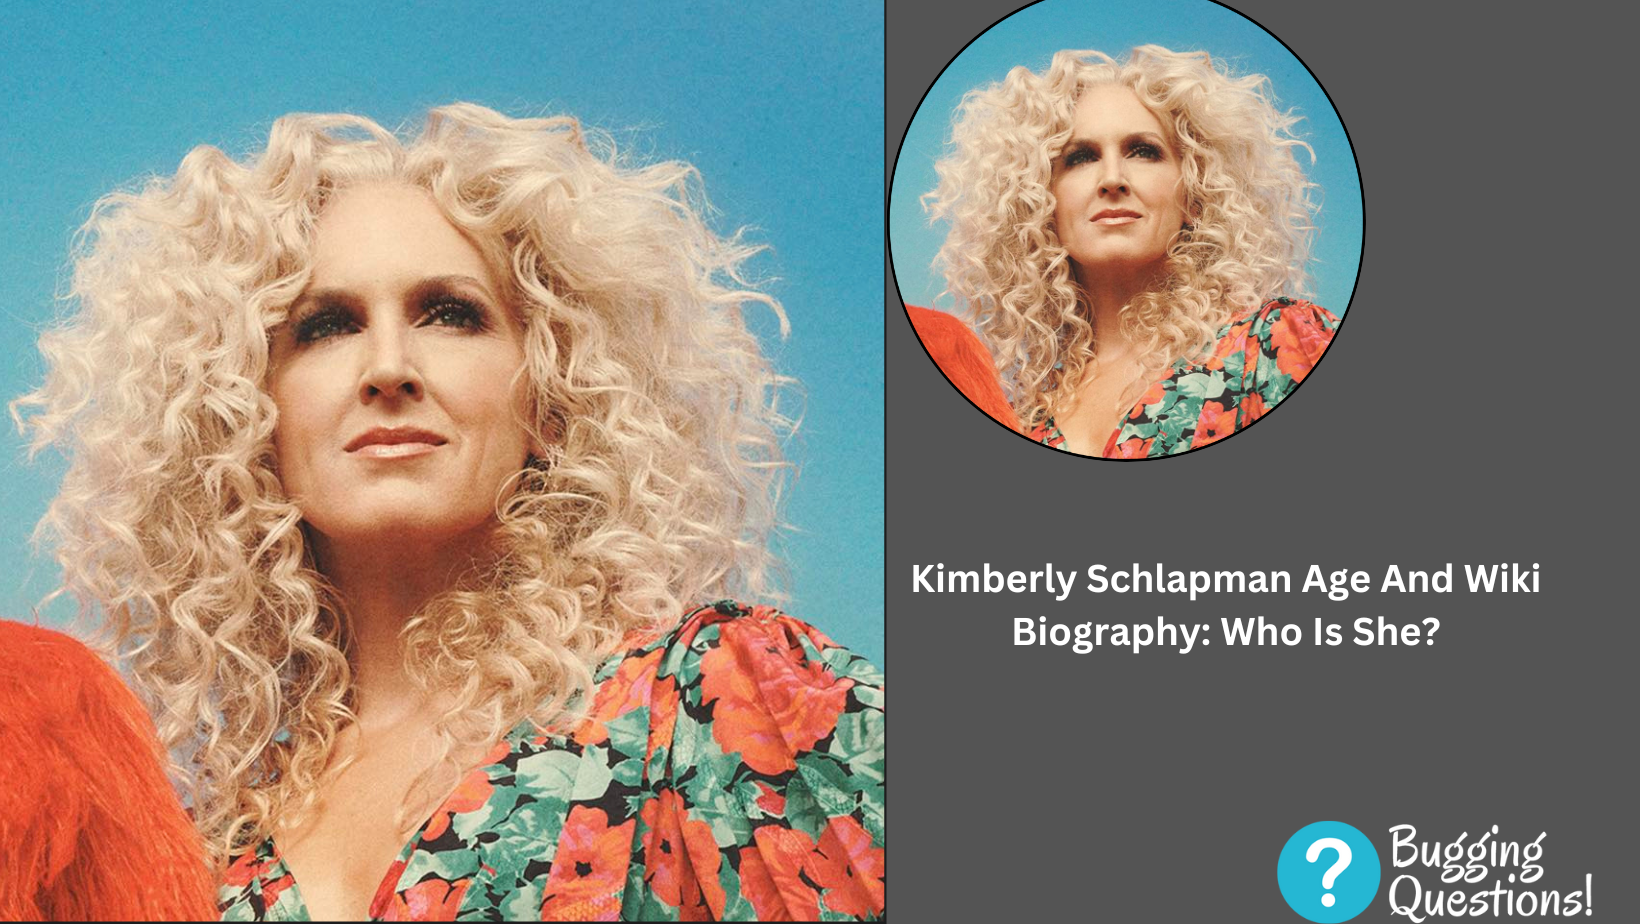 Kimberly Schlapman Age And Wiki Biography